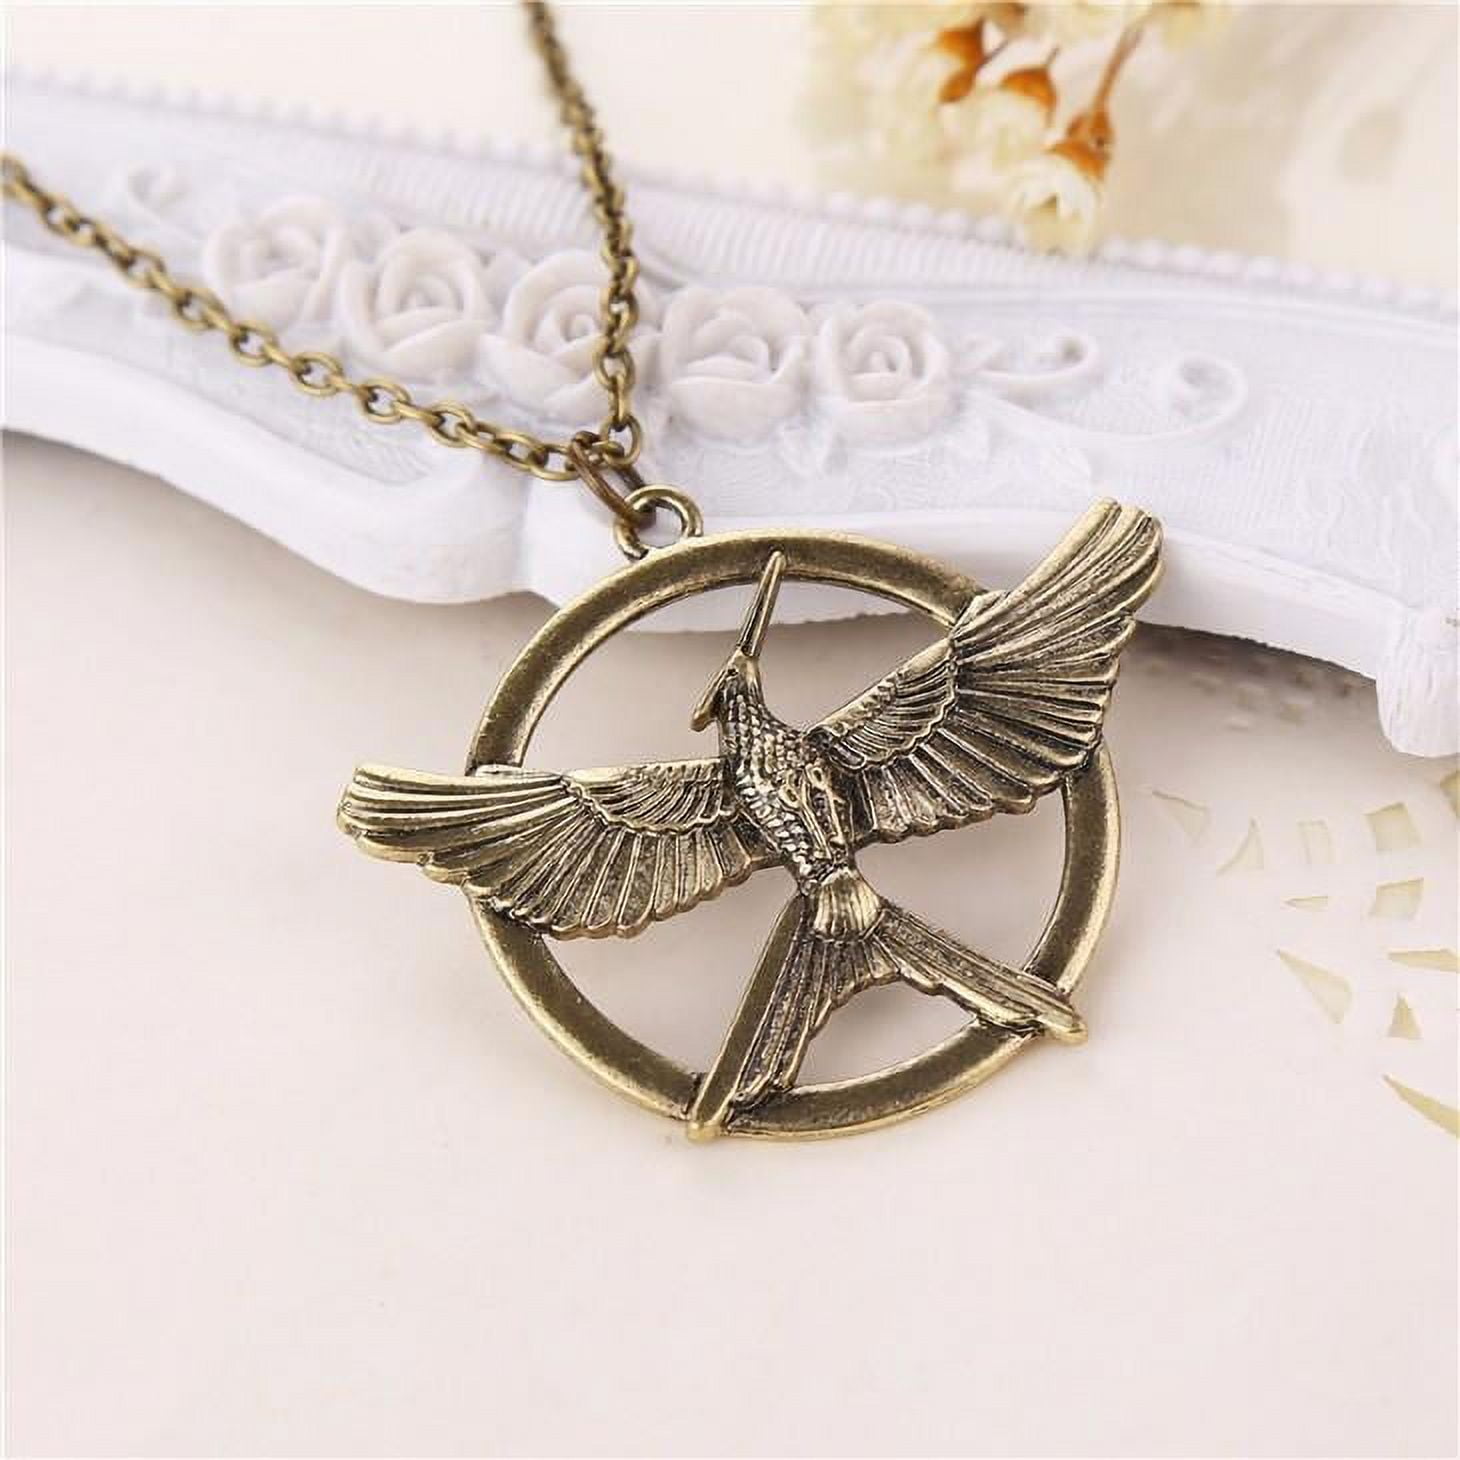 Buy RVM Jewels Percy Jackson Hunger Games Potter Deathly Hallows Divergent  and The Mortal Instruments Gold Pendant Necklace Fashion Jewellery  Accessory for Men and Women at Amazon.in